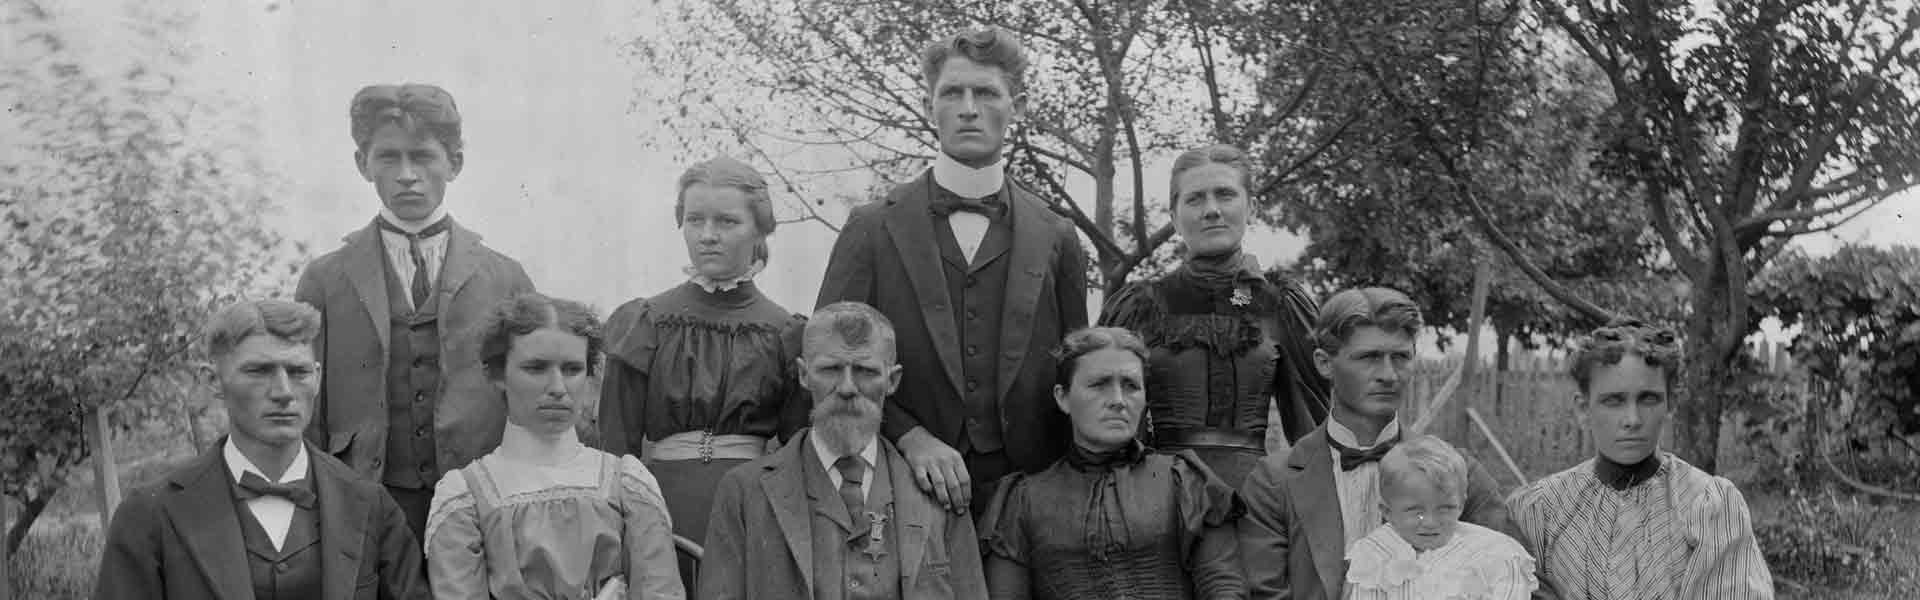 Family portrait with men and women circa 1900